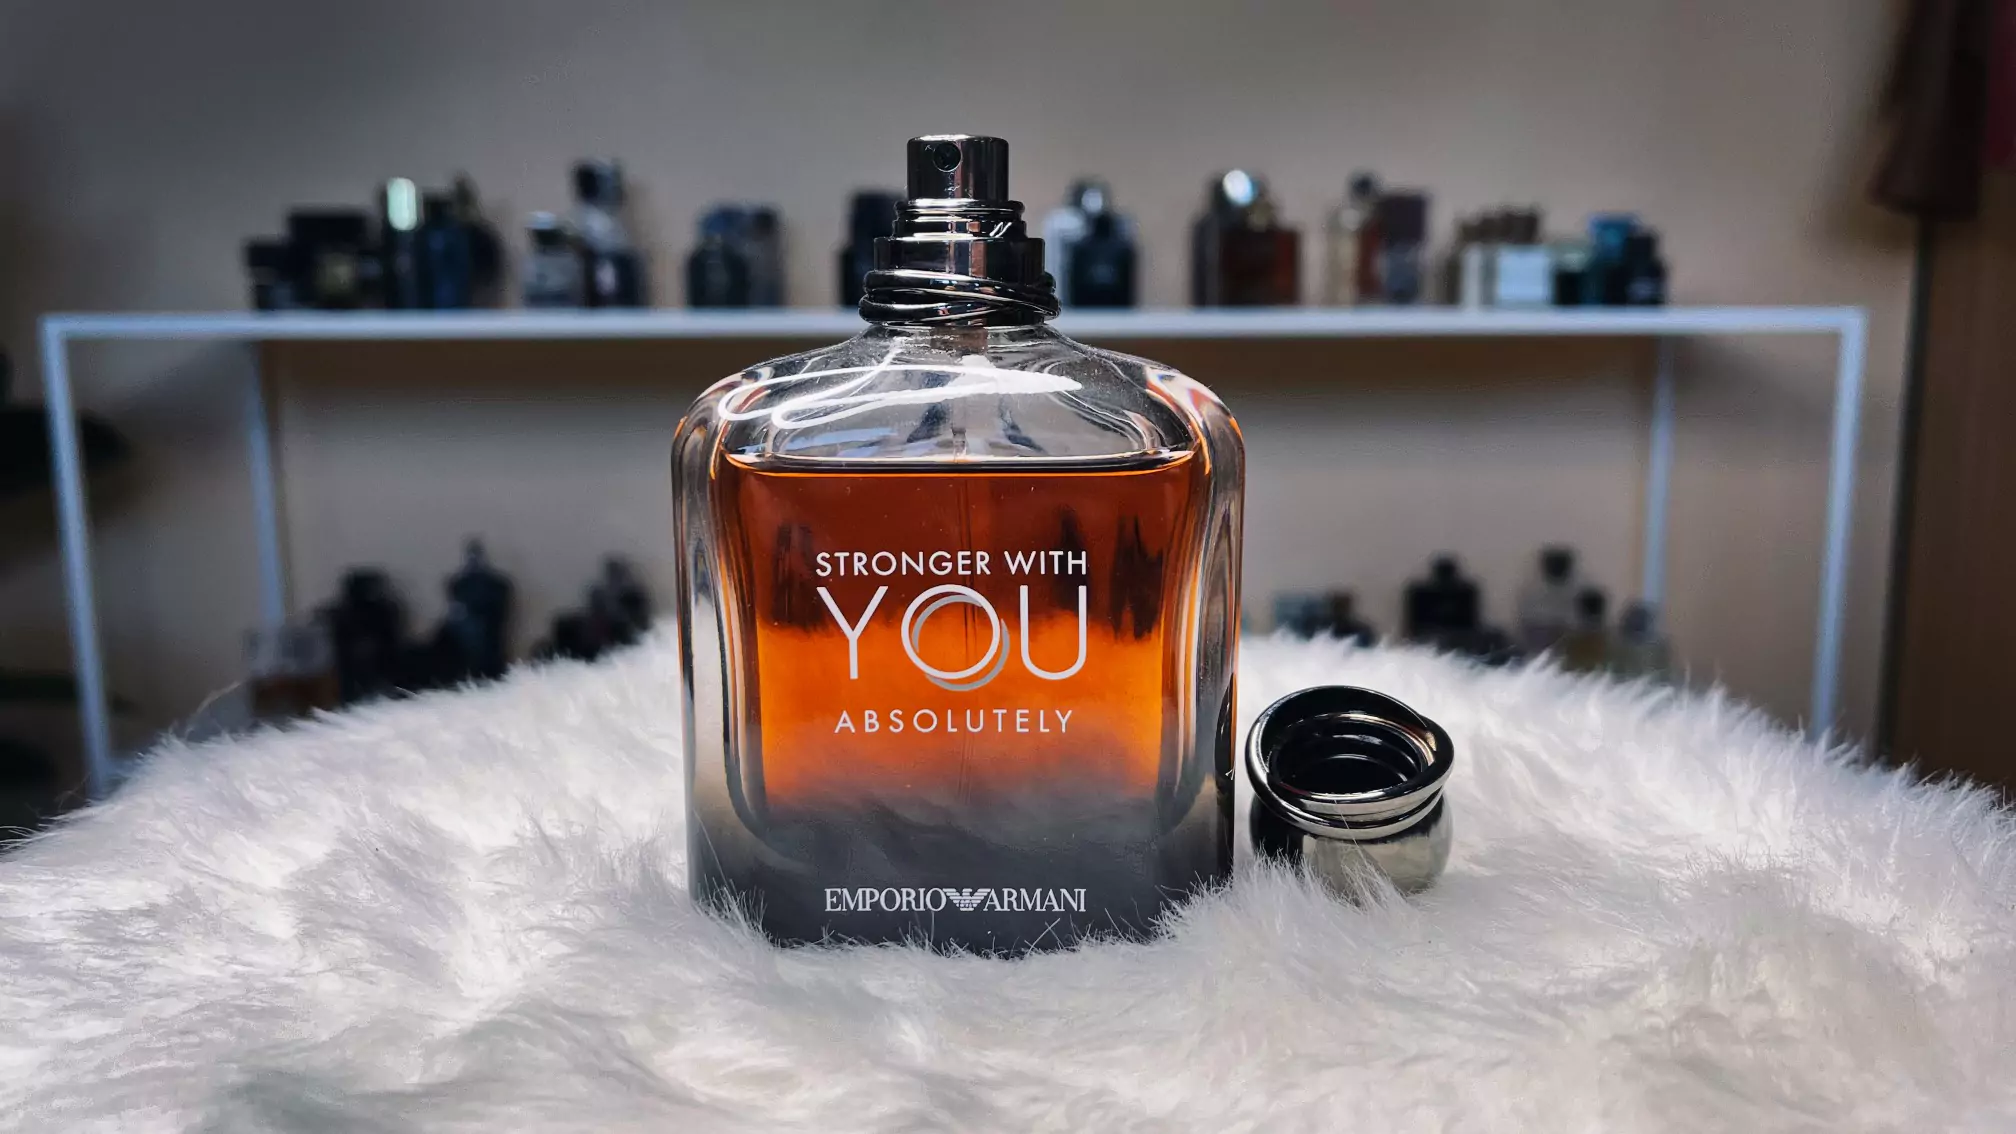 Stronger With You Absolutely (Armani)